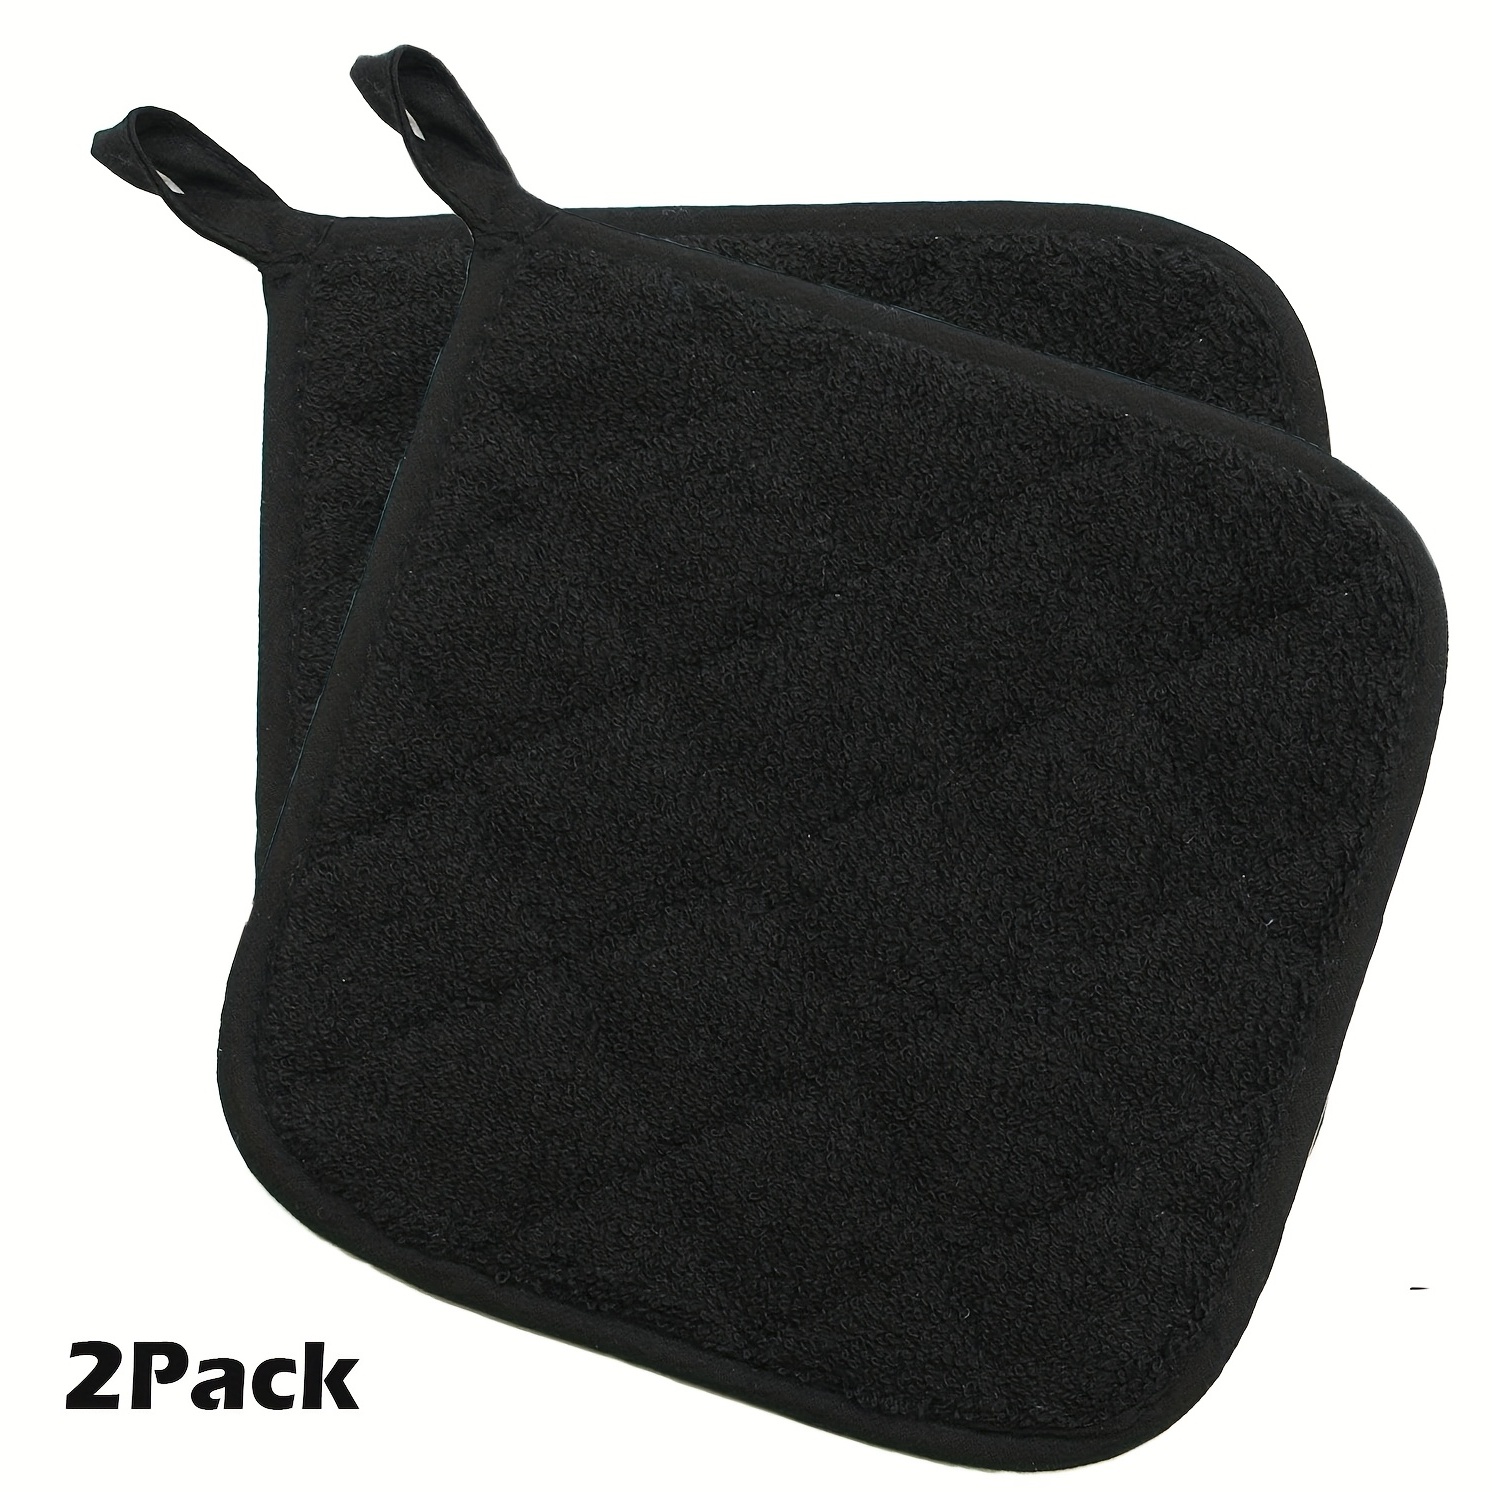 Kitchen Pot Holders - Insulated 100% Cotton Canvas Hot Pads for Oven- Heat  Resistant- 2-Pack 